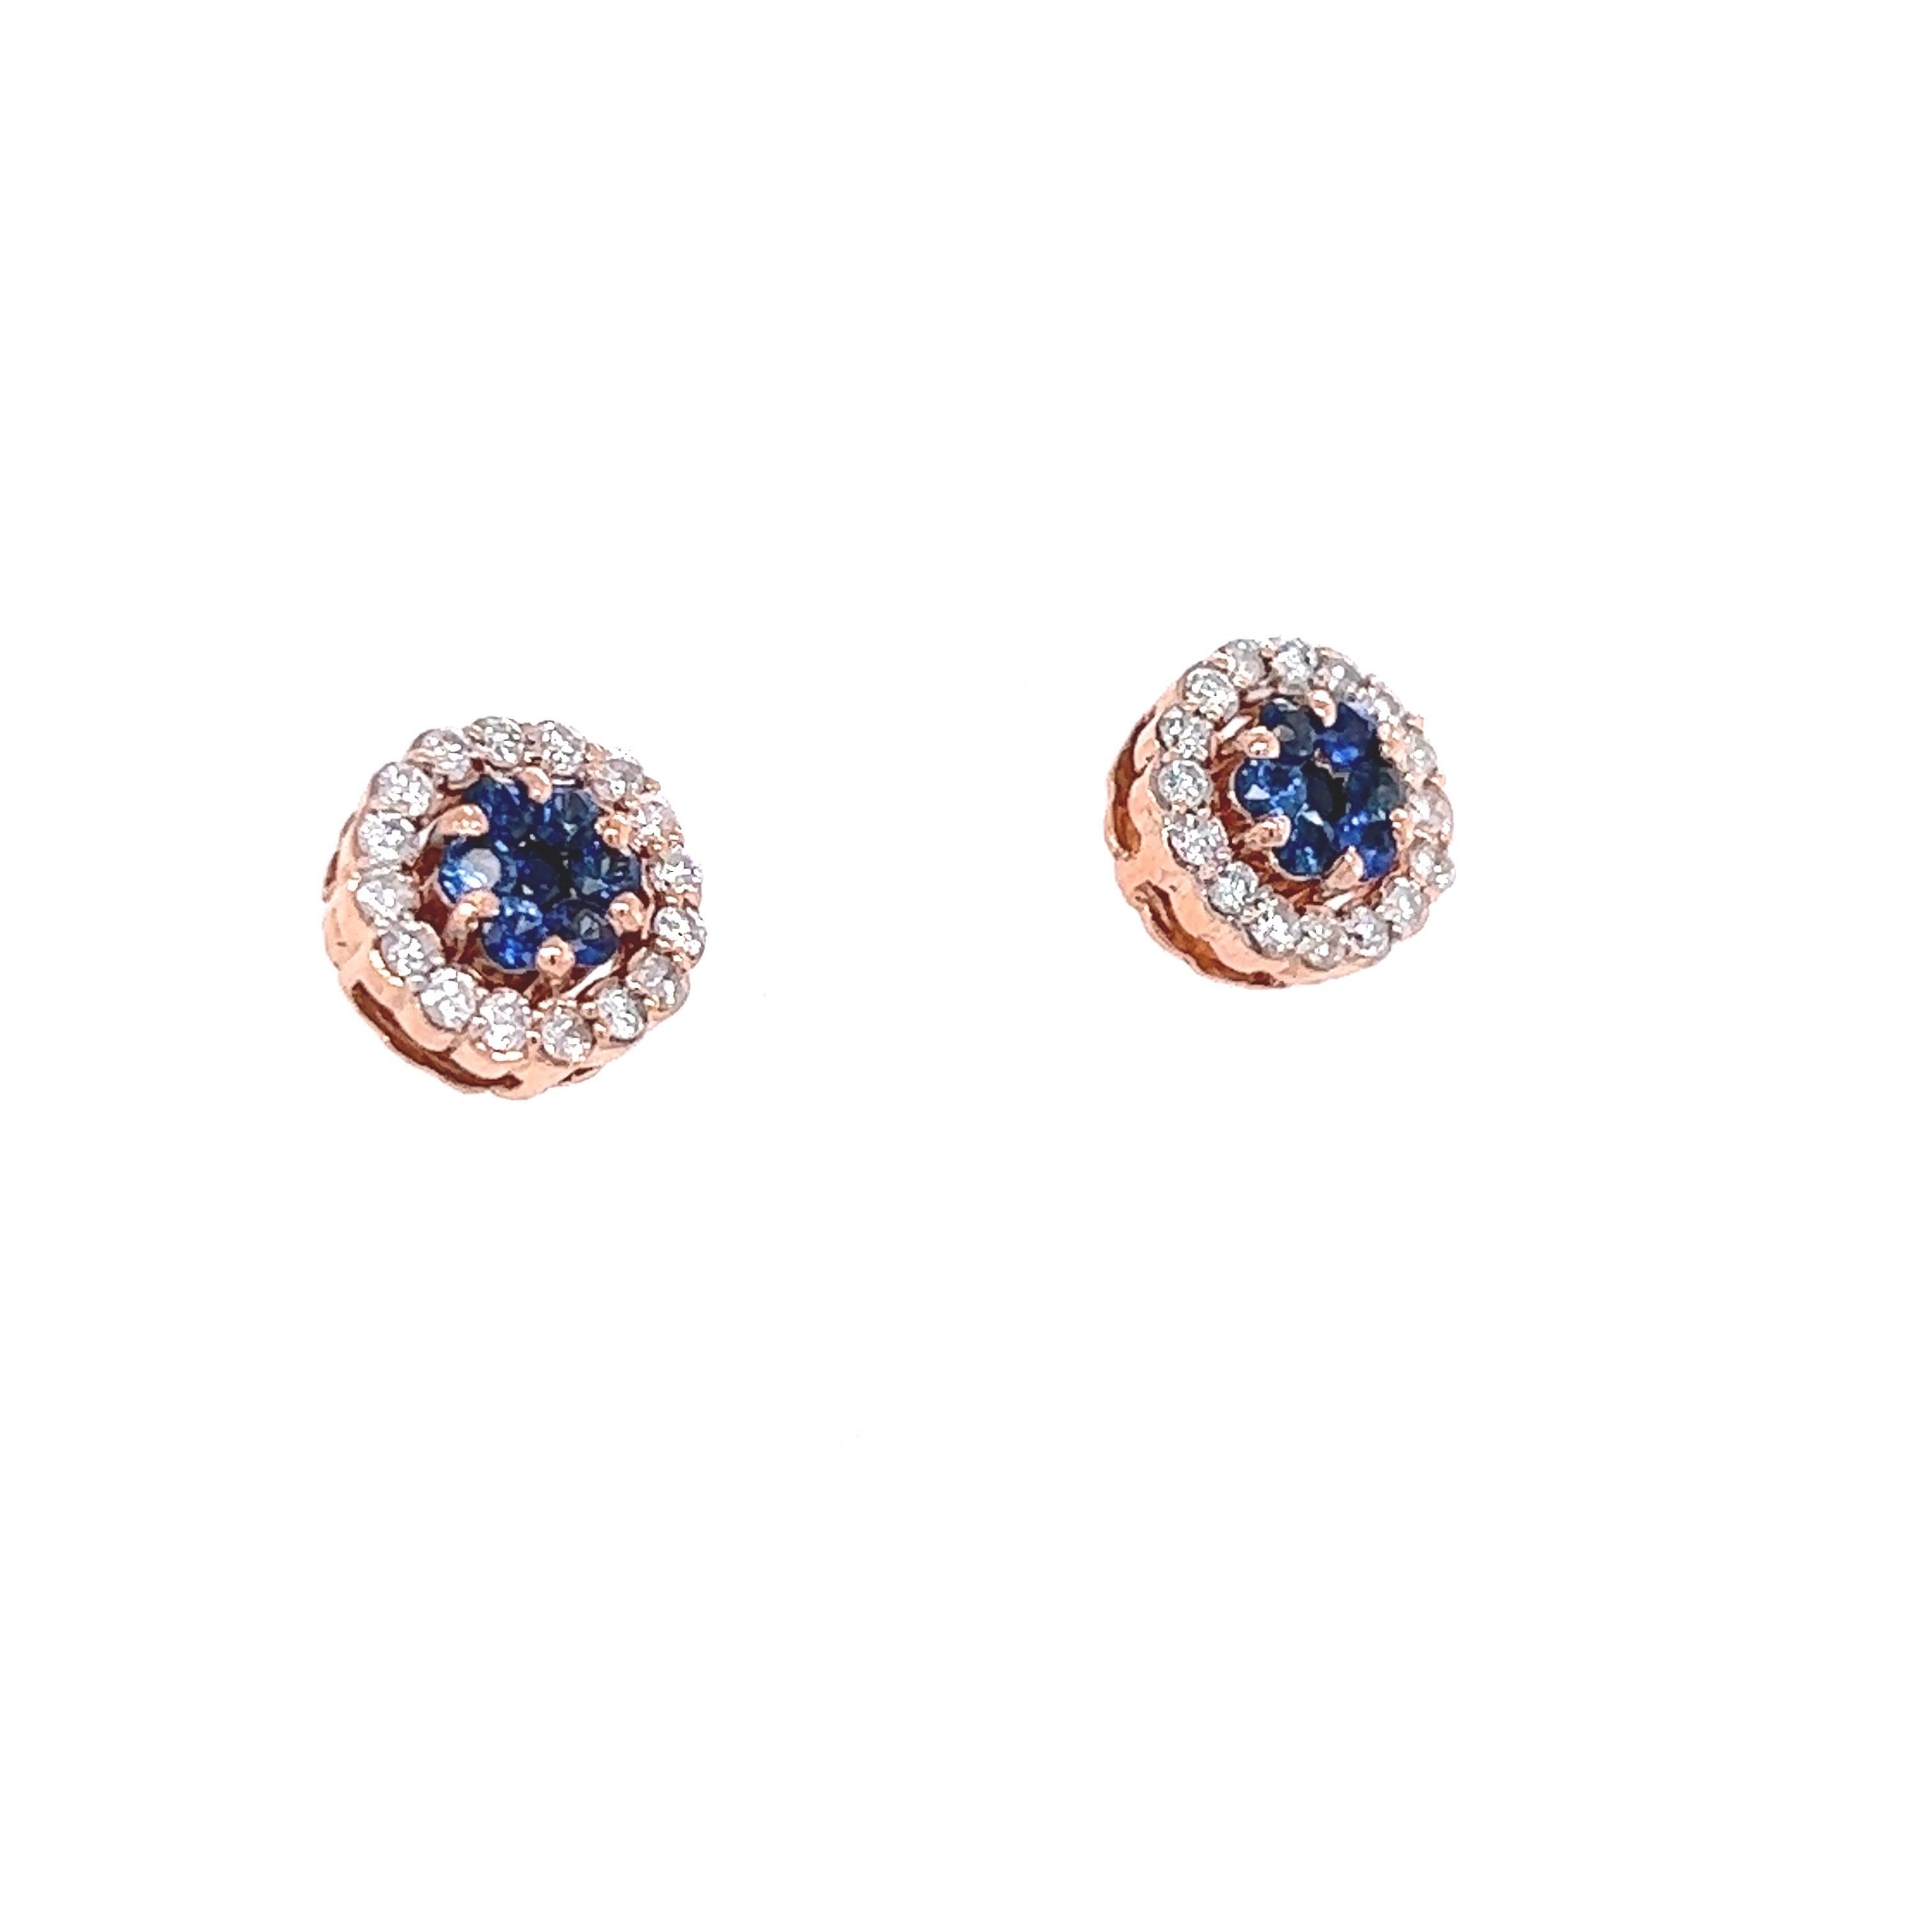 Contemporary 1.19 Carat Blue Sapphire Diamond Rose Gold Earrings For Sale